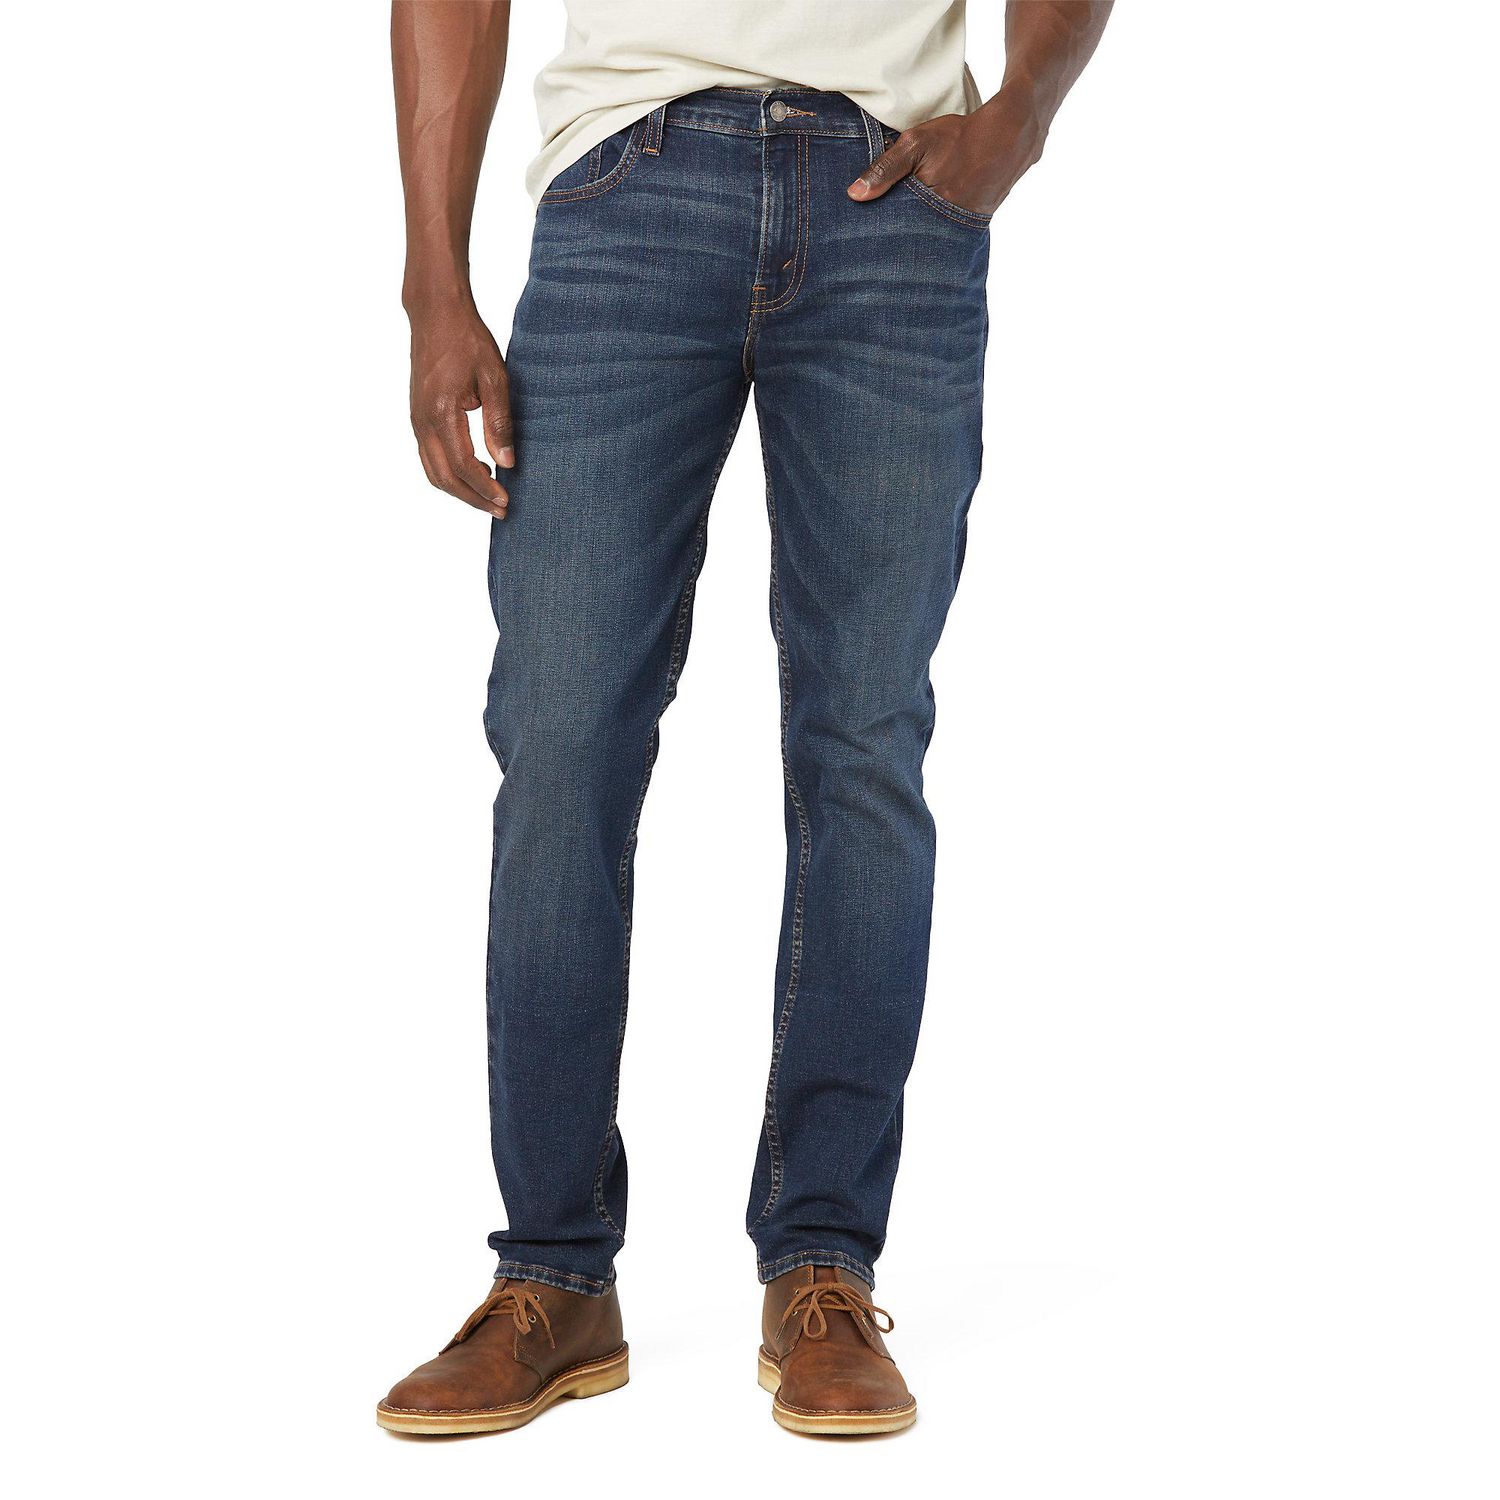 Signature by Levi Strauss & Co.™ Men's Slim Fit Jeans | Walmart Canada